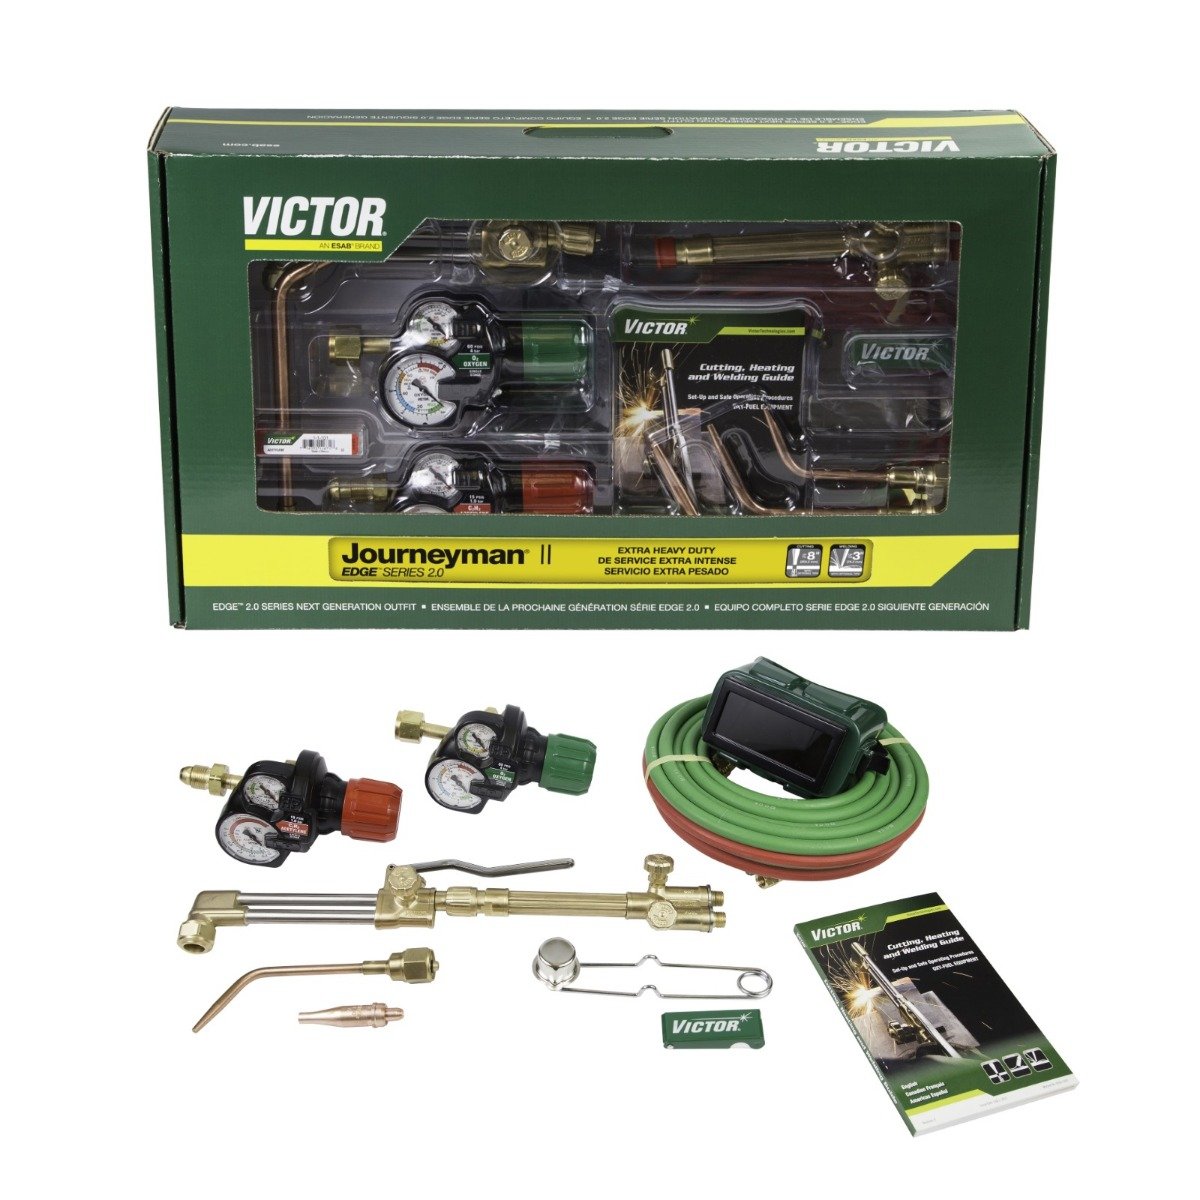 Victor Journeyman II Welding and Cutting Outfit (0384-2110)